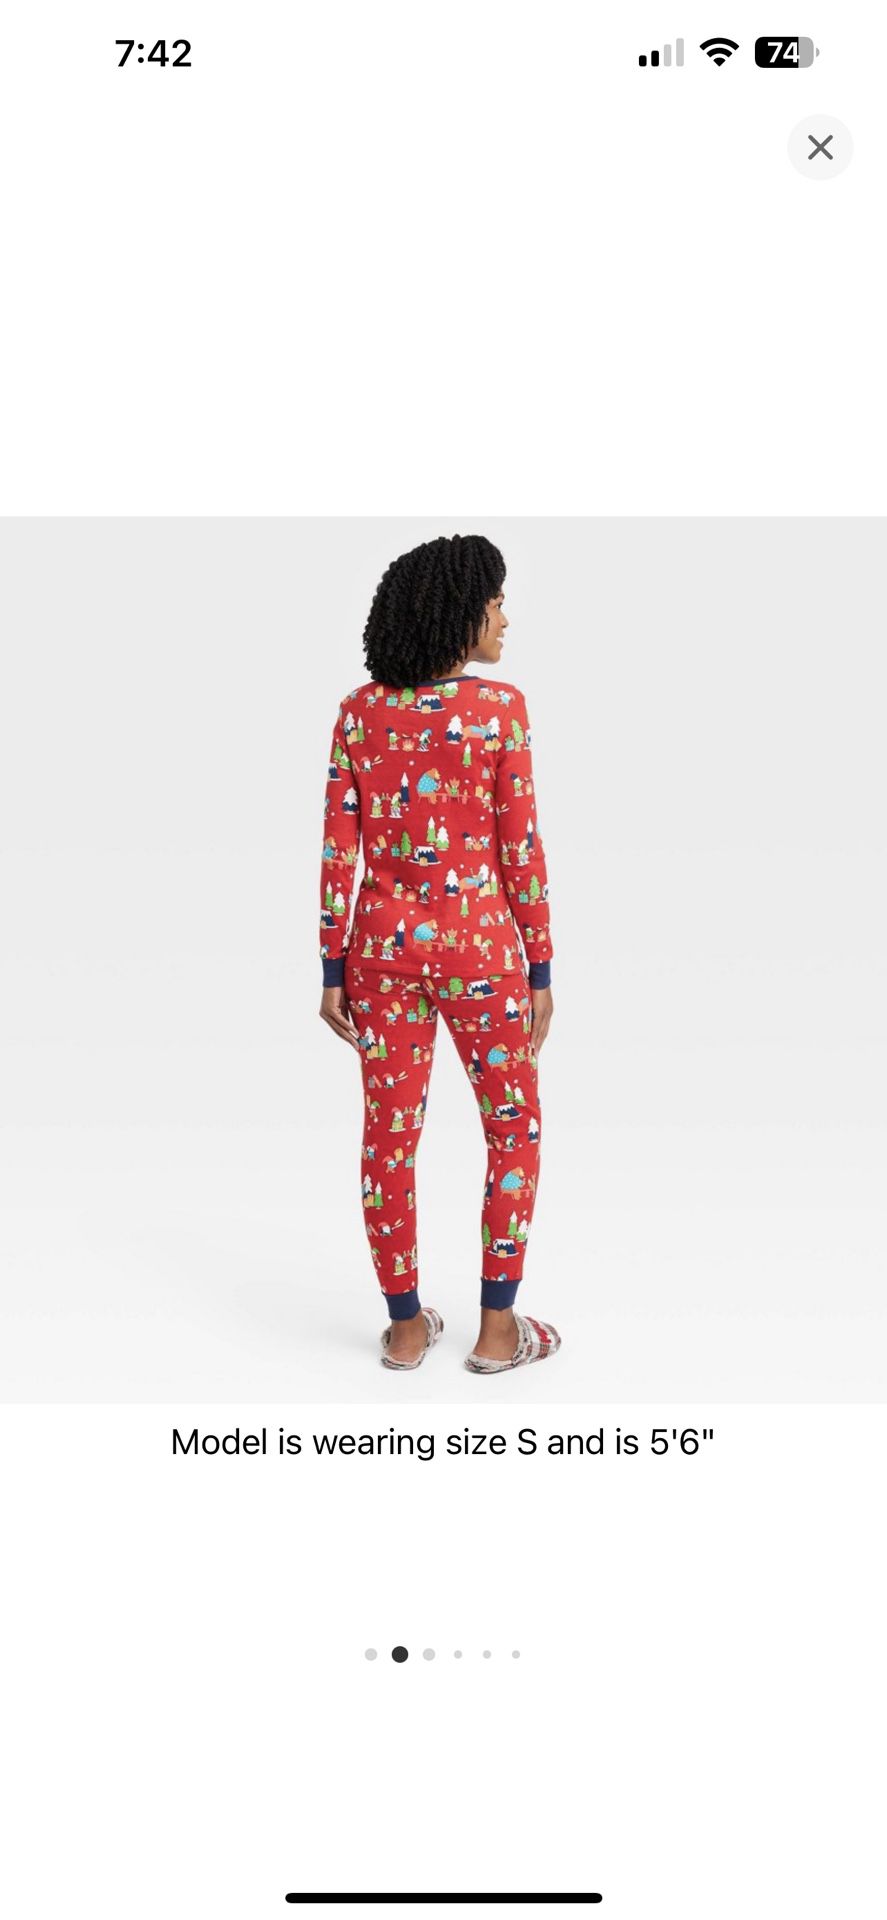 Women's Holiday Gnomes Print Matching - Red L